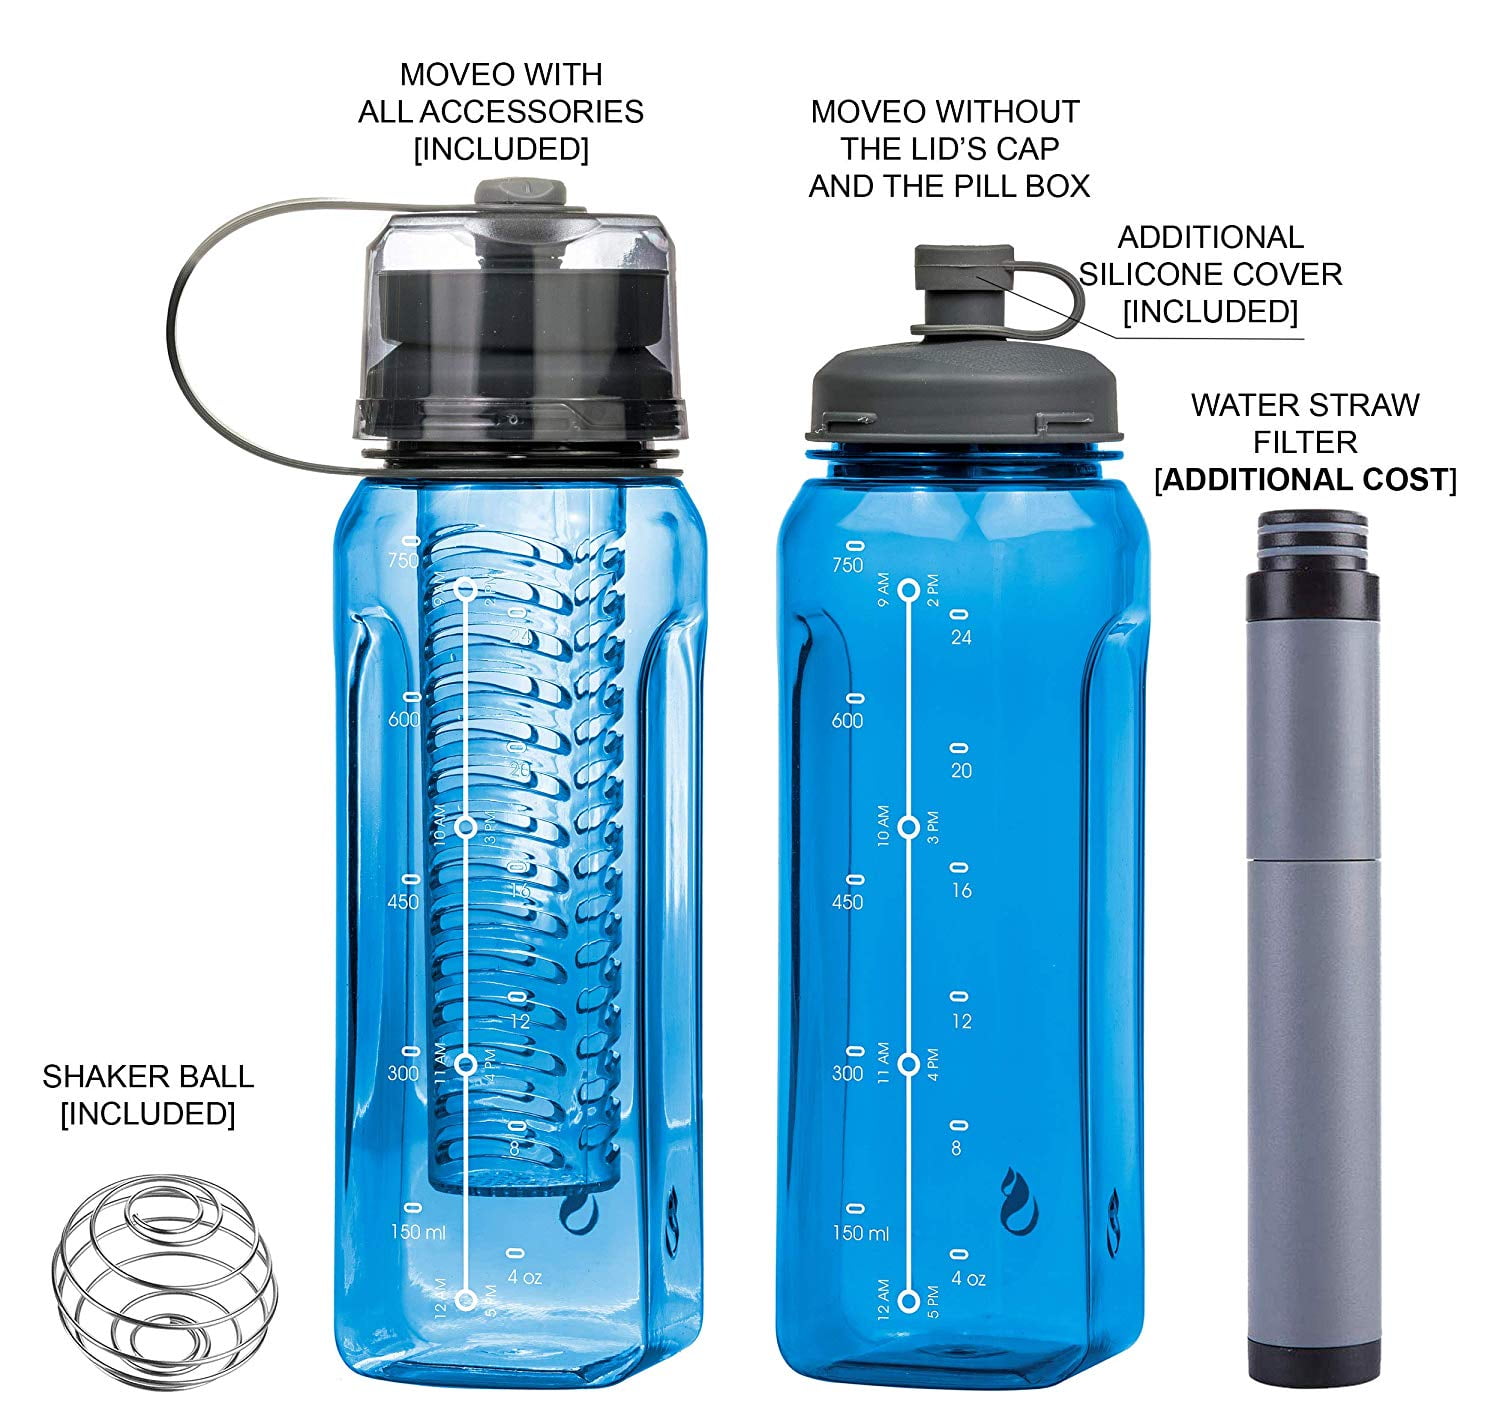 Glass and Silicone Water Bottle - ApolloBox